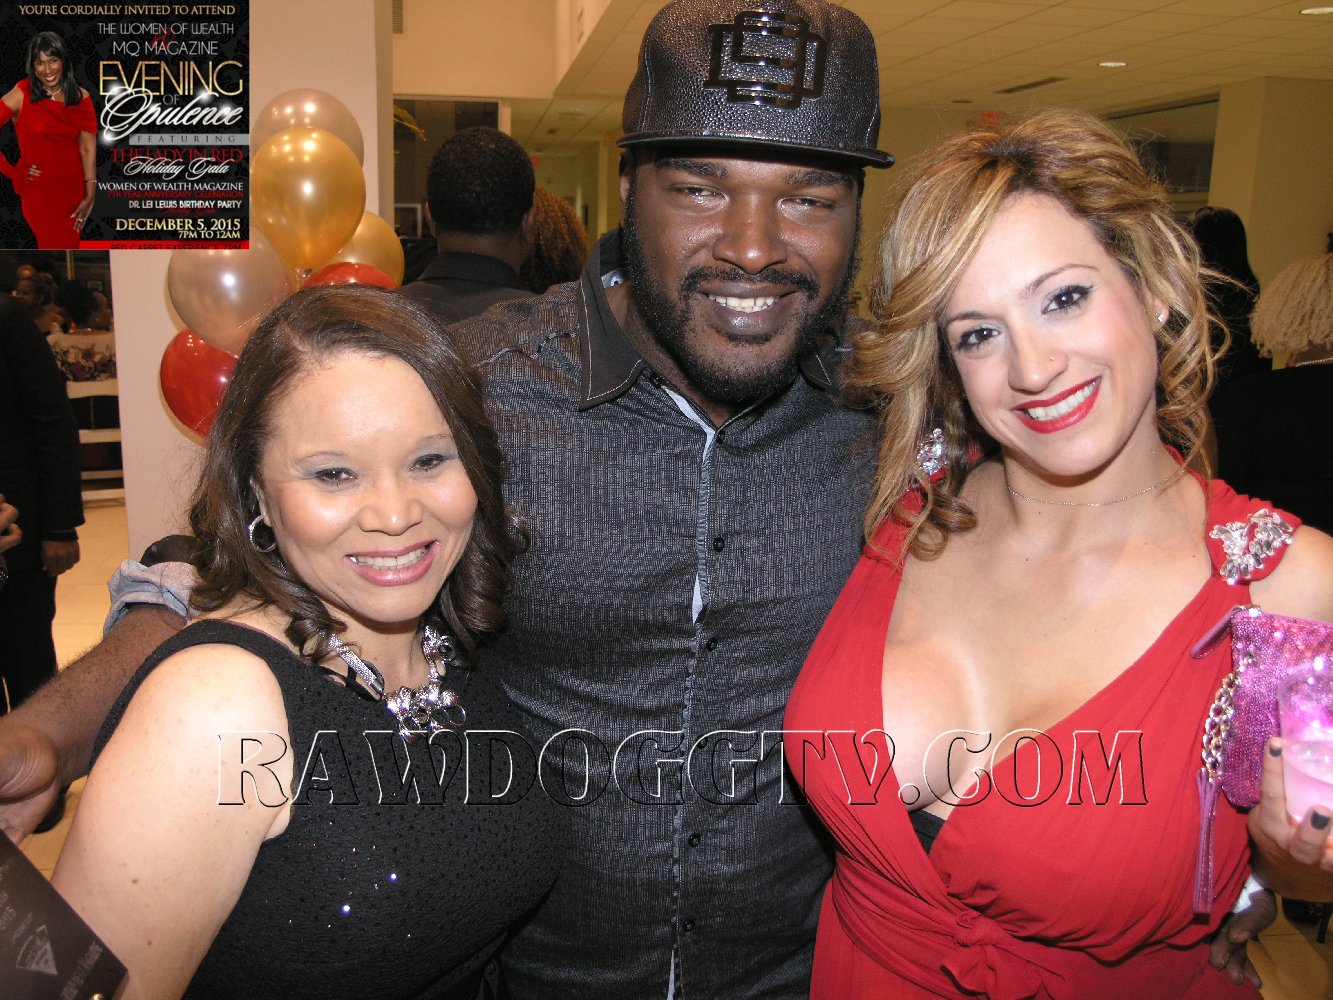 Women of Wealth Magazine Photos-St. Jude Childrens Research Hospital Toy Drive Image- Global Press Dist RAWDOGGTV 305-490-2182 (7)